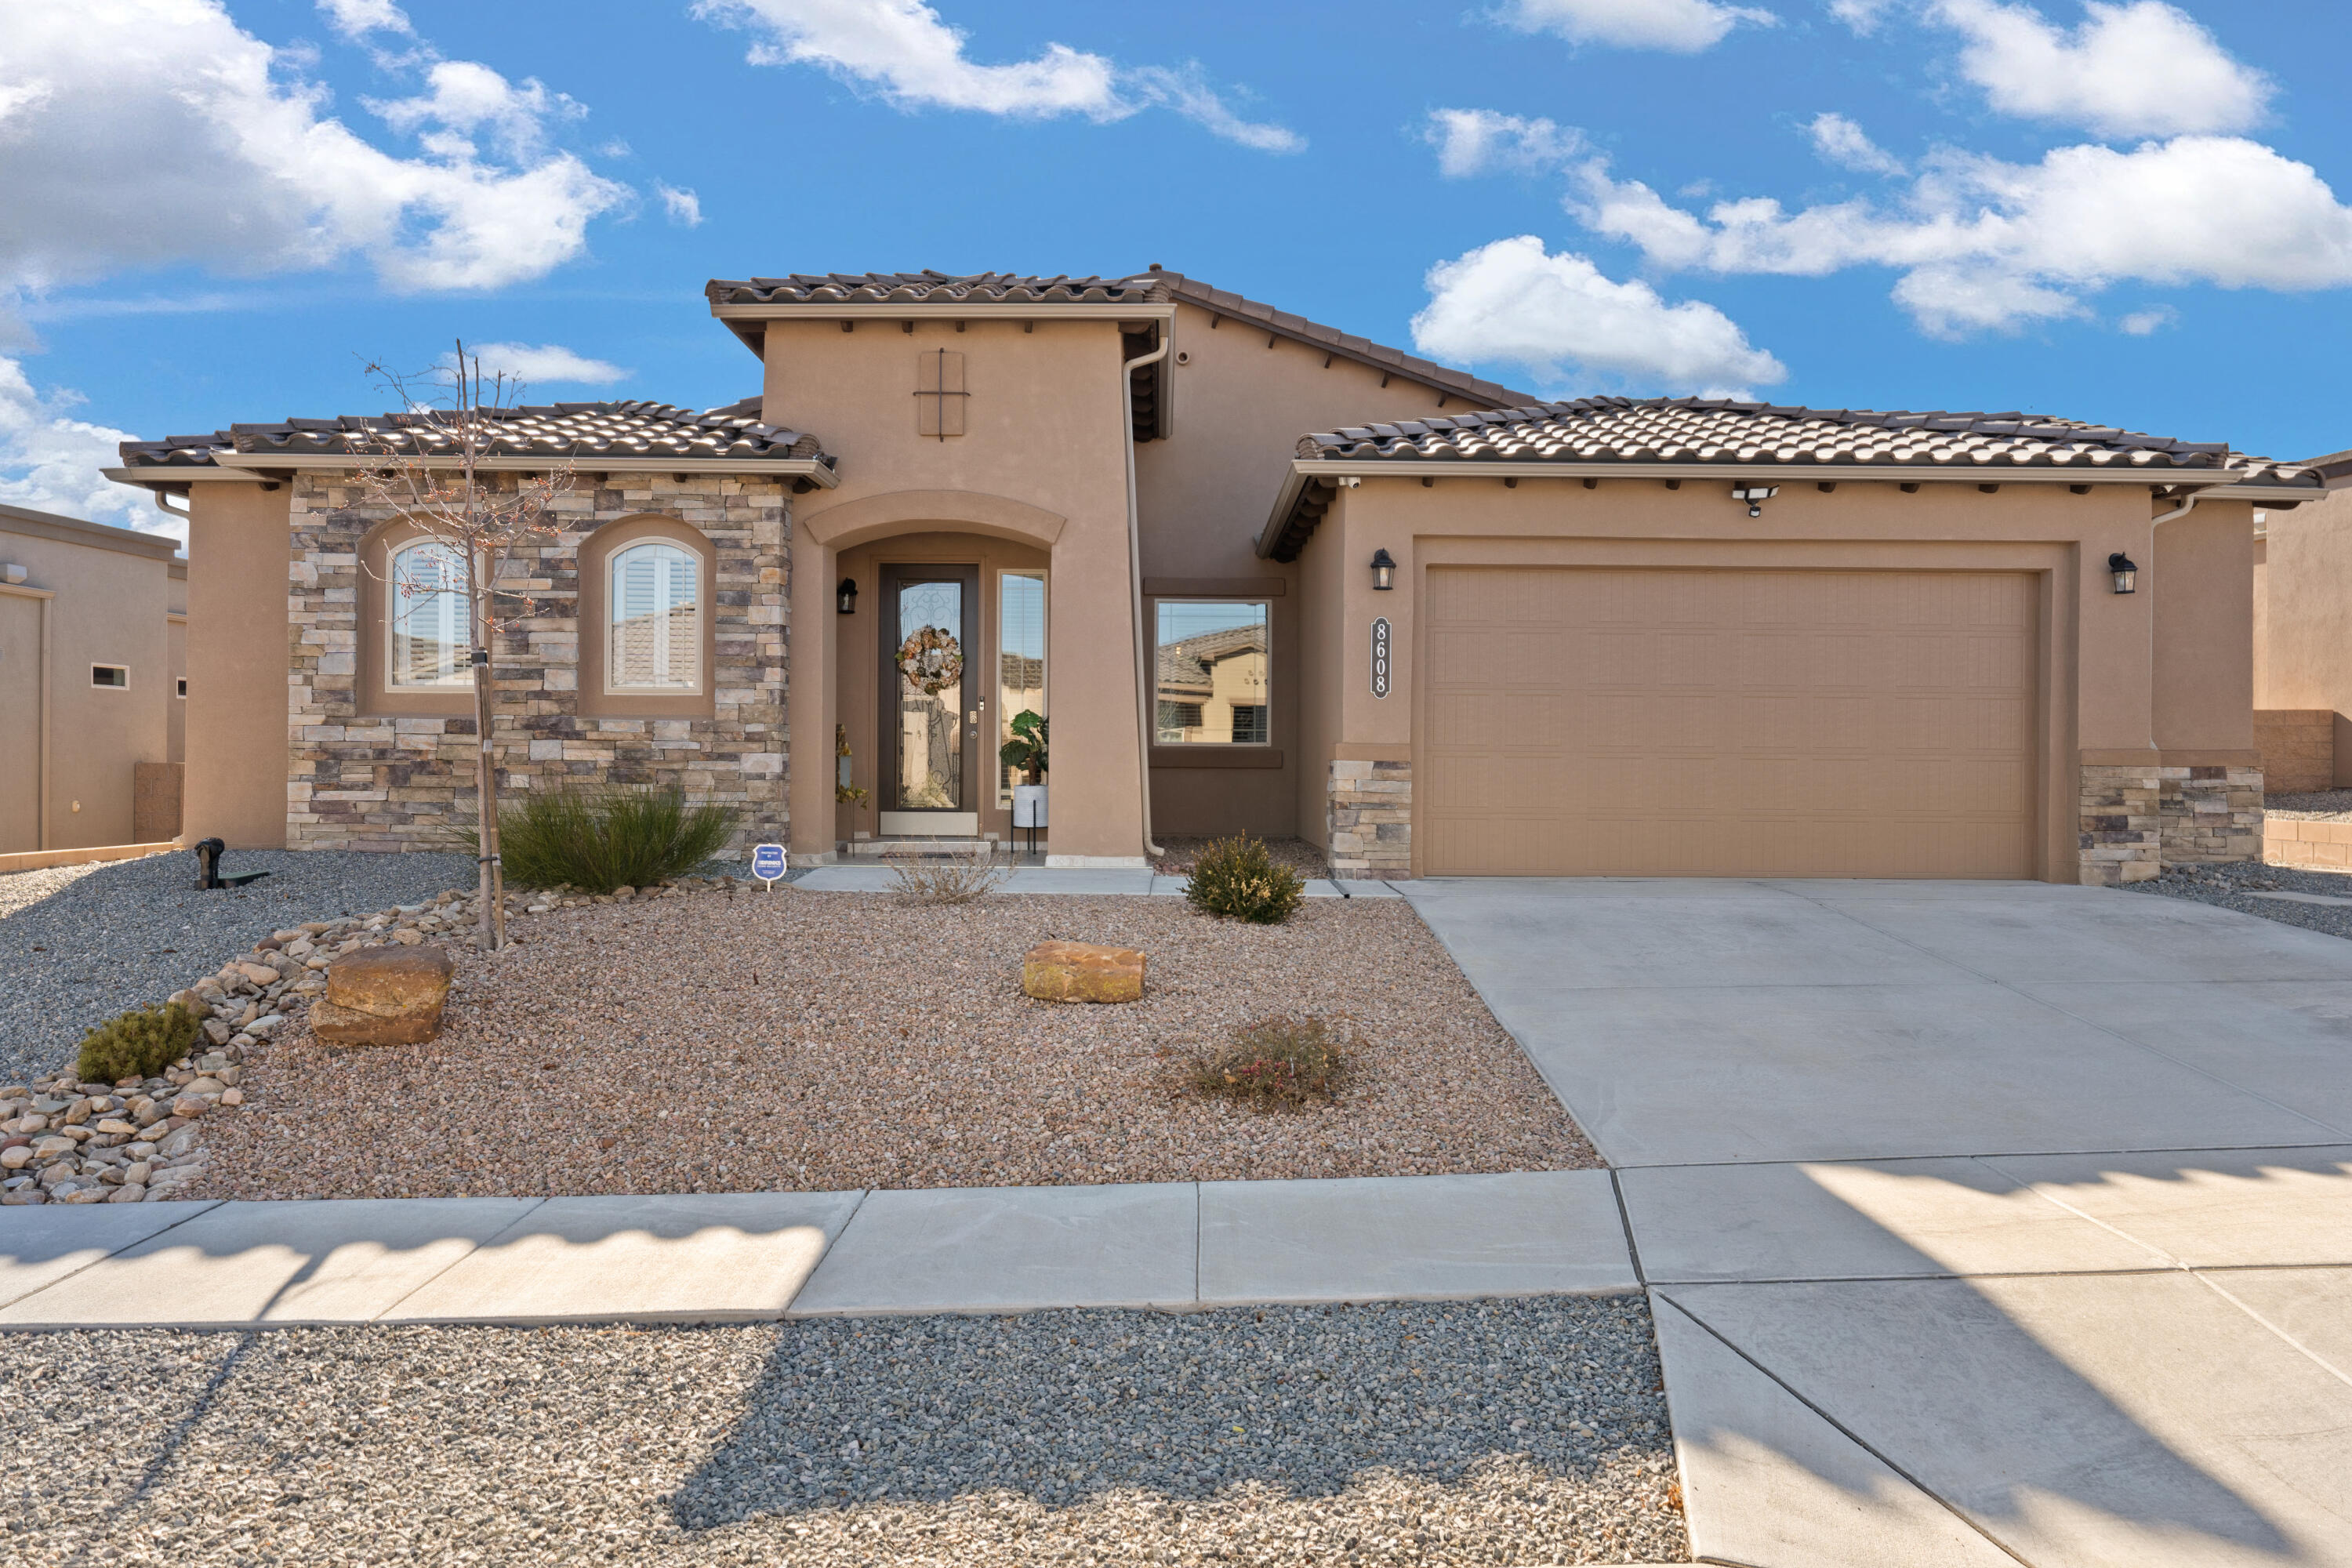 Welcome to the beautiful community of Stormcloud! You'll be impressed w/the terrific floorplan, quality, & location! This home offers 2,391 SqFt of living space w/3BR, 2.5BA, 3-car tandem garage, home office & a bonus patio room. Meticulously maintained chef's kitchen w/granite countertops, decorative backsplash, kitchen island w/bar seating, SS appliances, built-in gas cooktop, & a walk-in pantry! The owner's suite boasts custom window shutters, a large walk-in closet, a double sink vanity w/granite countertops & backsplash, separate tub, & a walk-in shower w/a glass enclosure. The backyard is beautifully done w/artificial grass & a stunning outdoor bbq island. Low maintenance, very well-manicured yard all around. This home has an estimated $68k in upgrades. Stunning in every way!